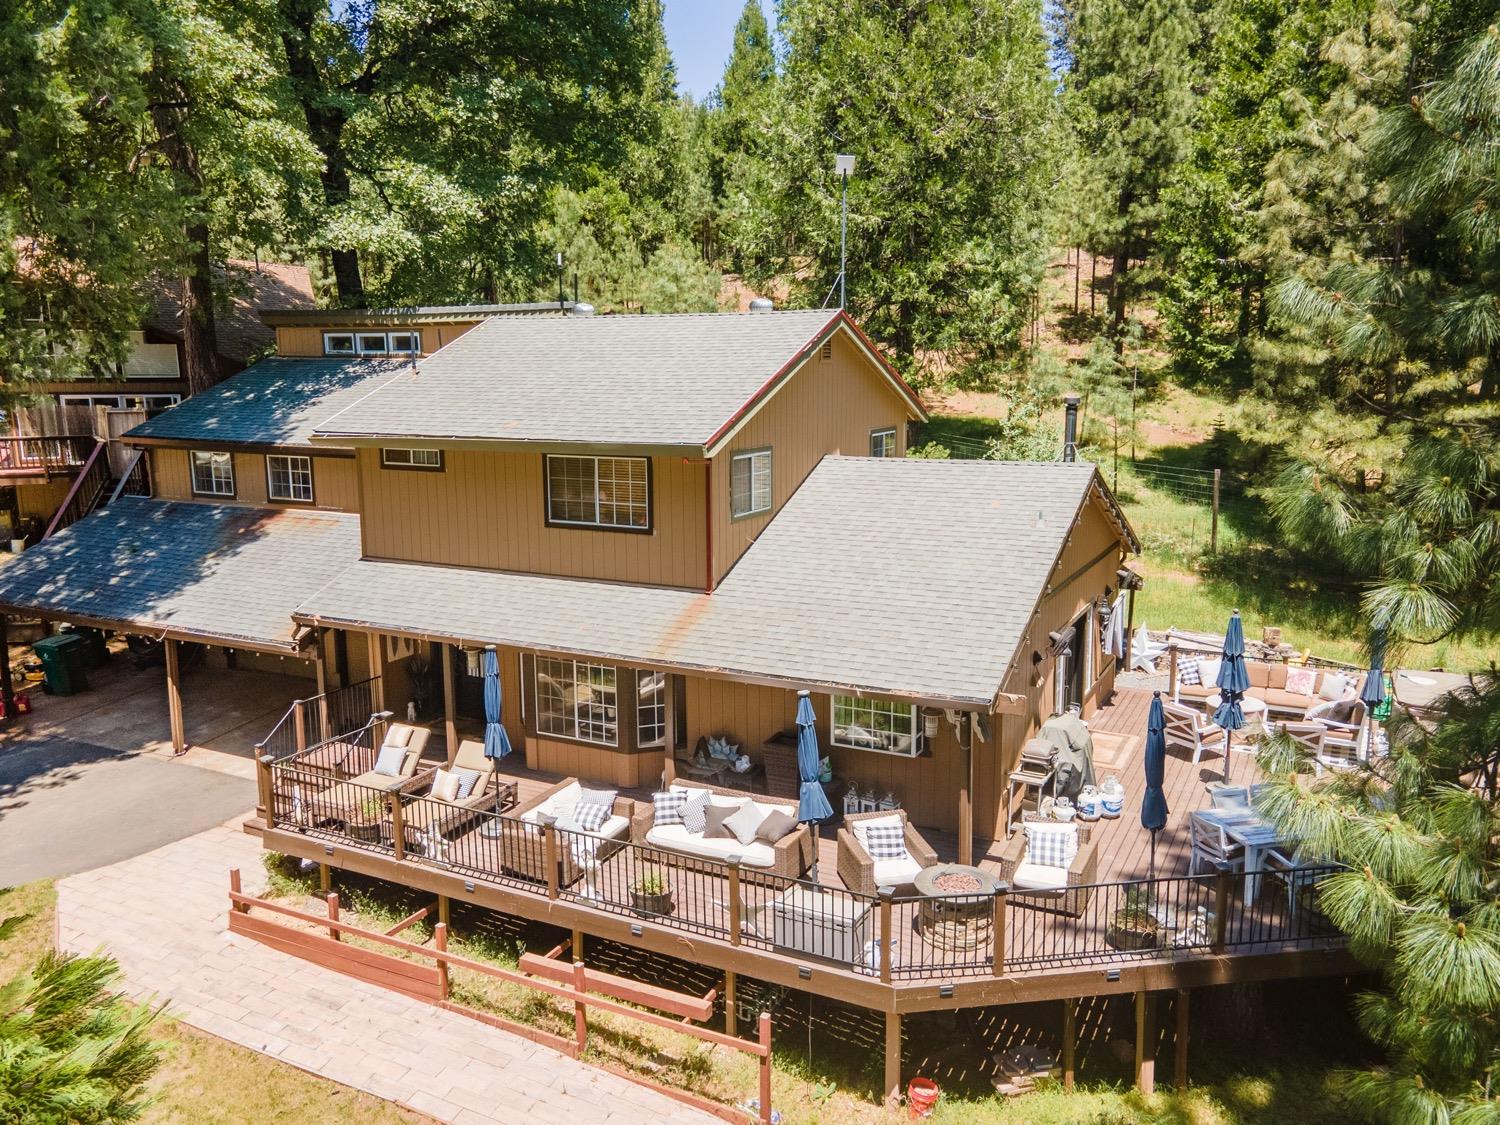 Welcome to 6271 Starkes Grade, a farm house dream come true. Settled with 3 Beds, 3 Baths and 2,375 